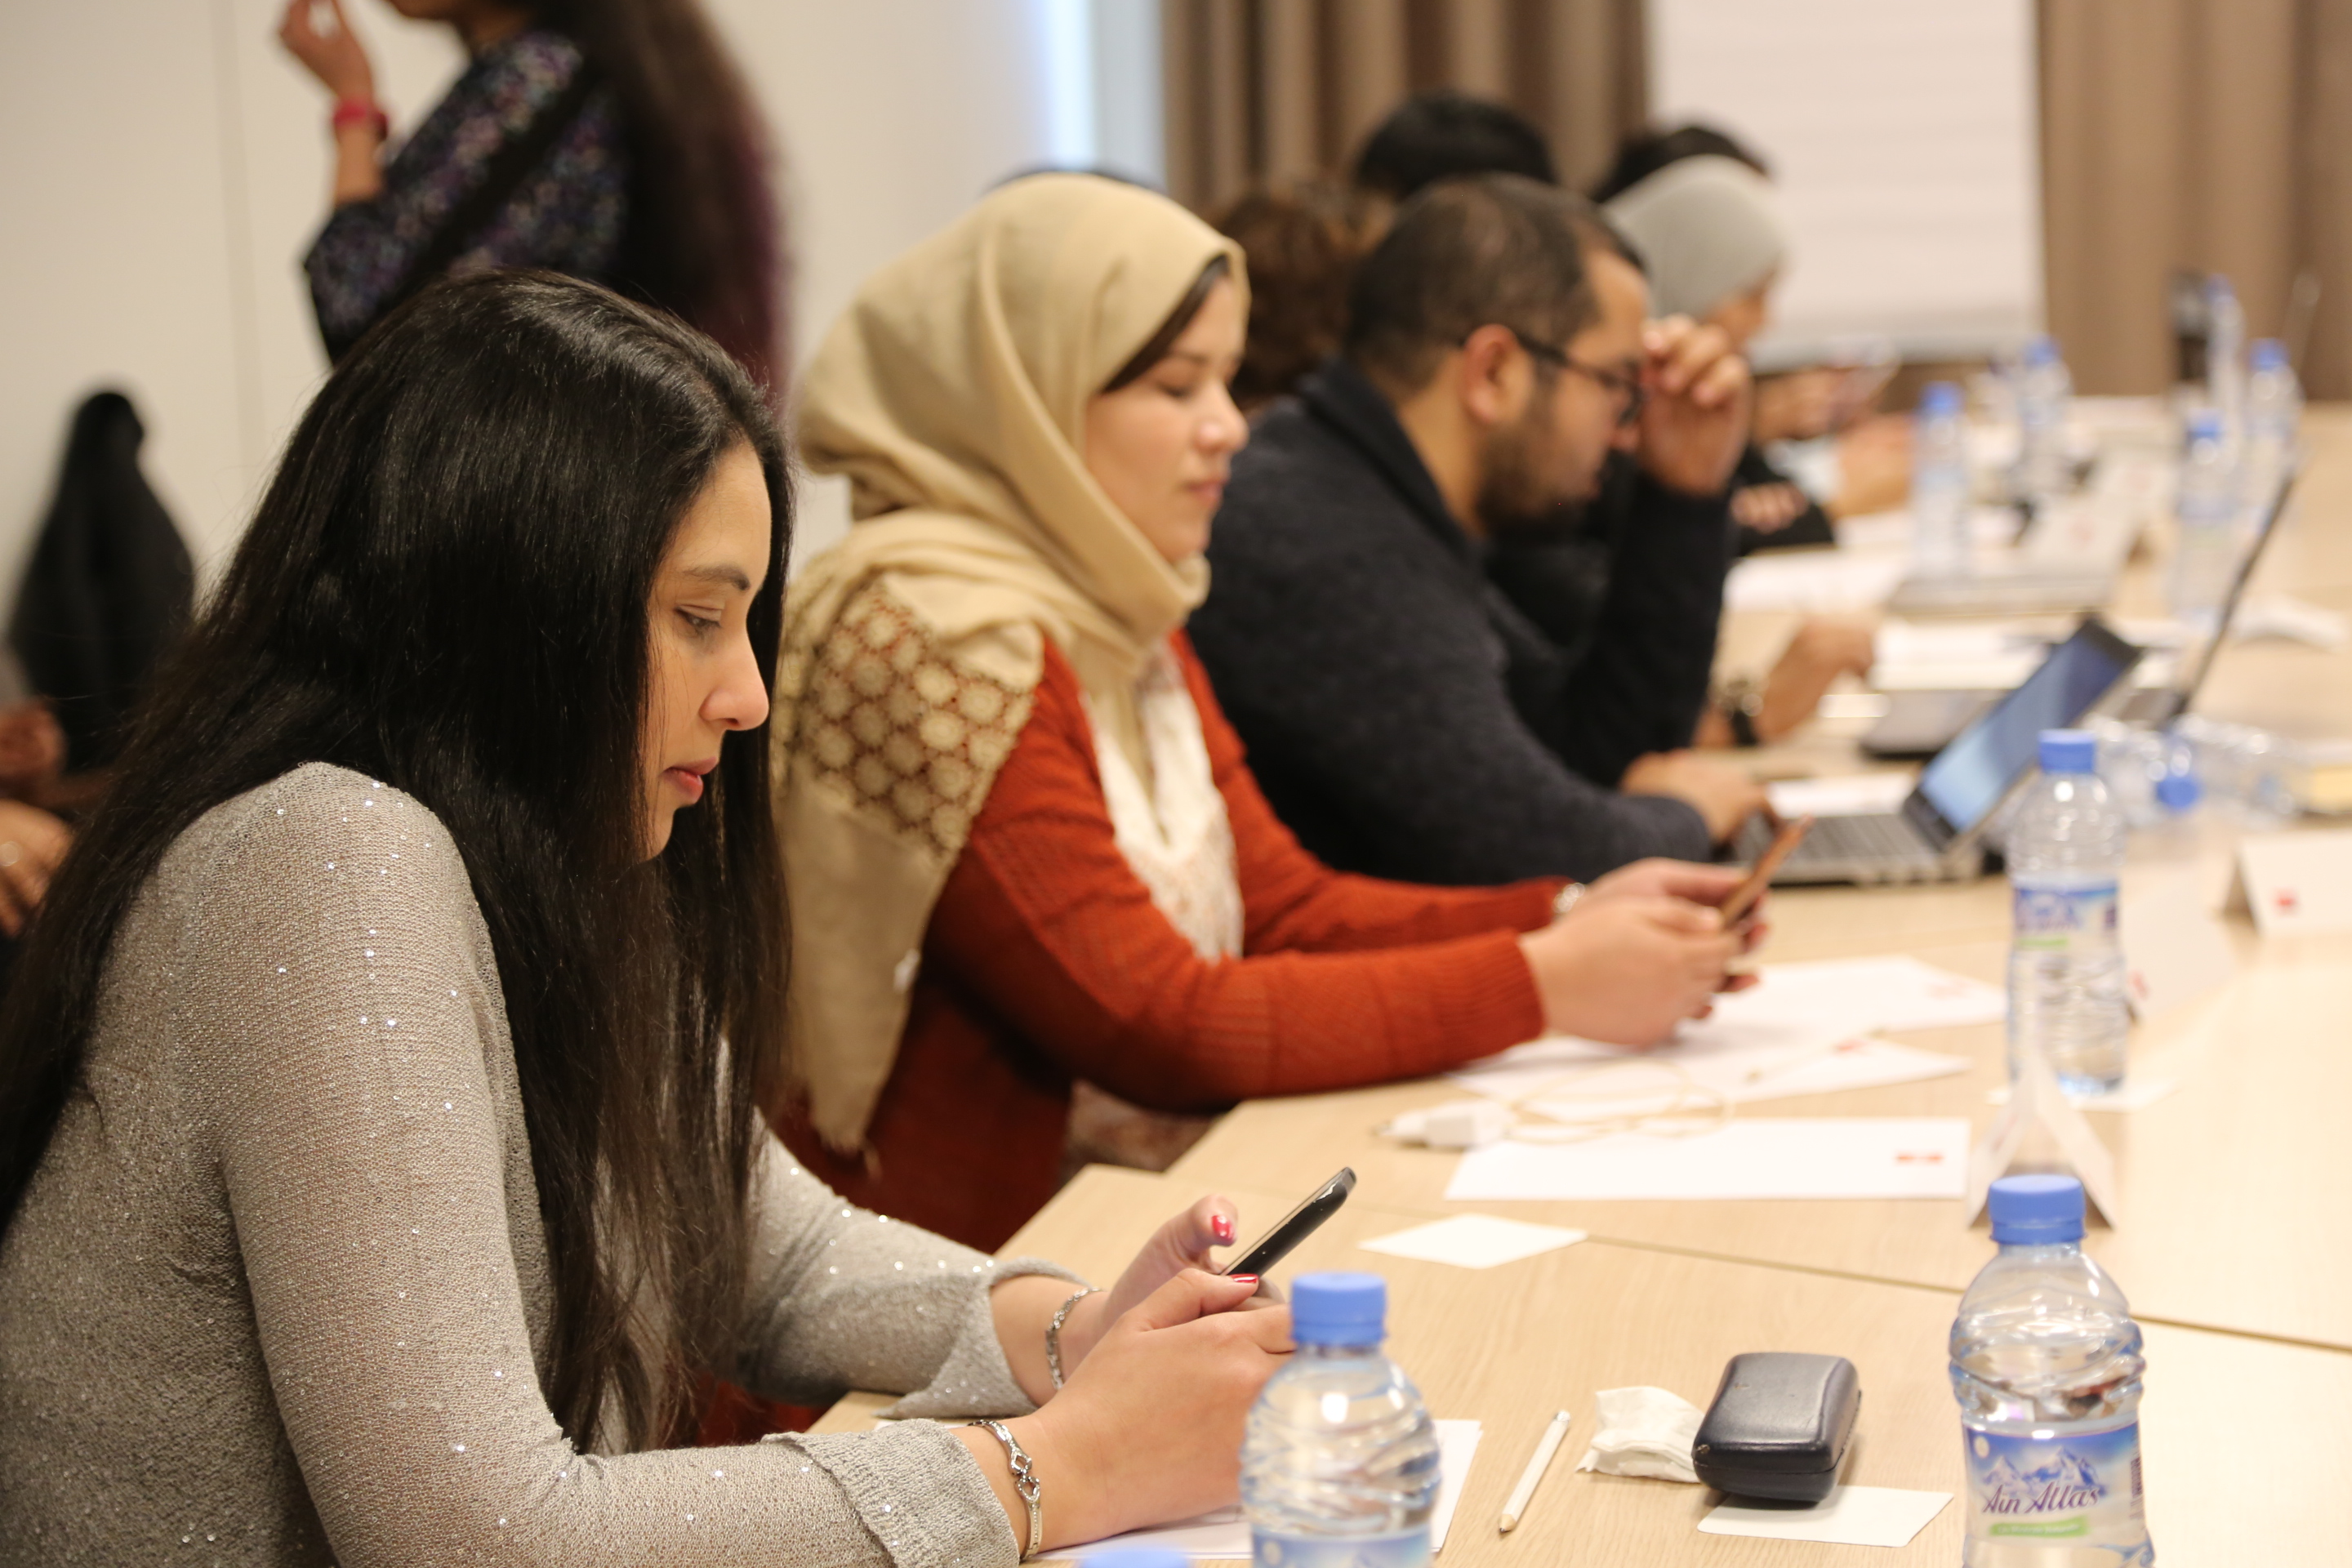 Journalists participate in one of the workshops offered by ICFJ in the MENA region.